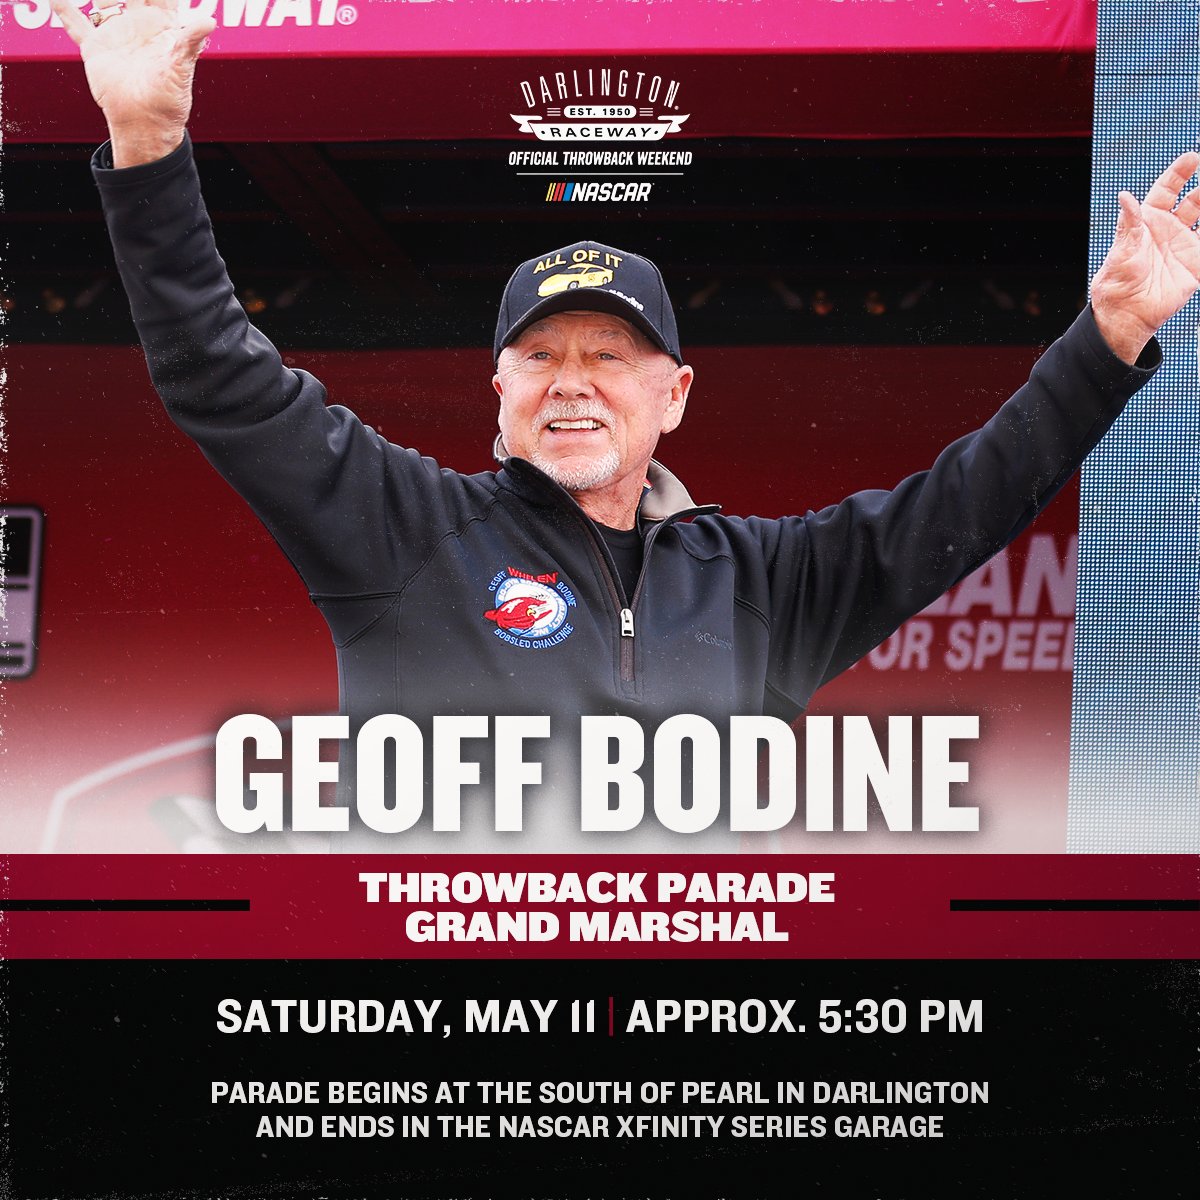 Geoff Bodine will be our Grand Marshal for the #NASCARThrowback Parade! 

#NASCARLegends